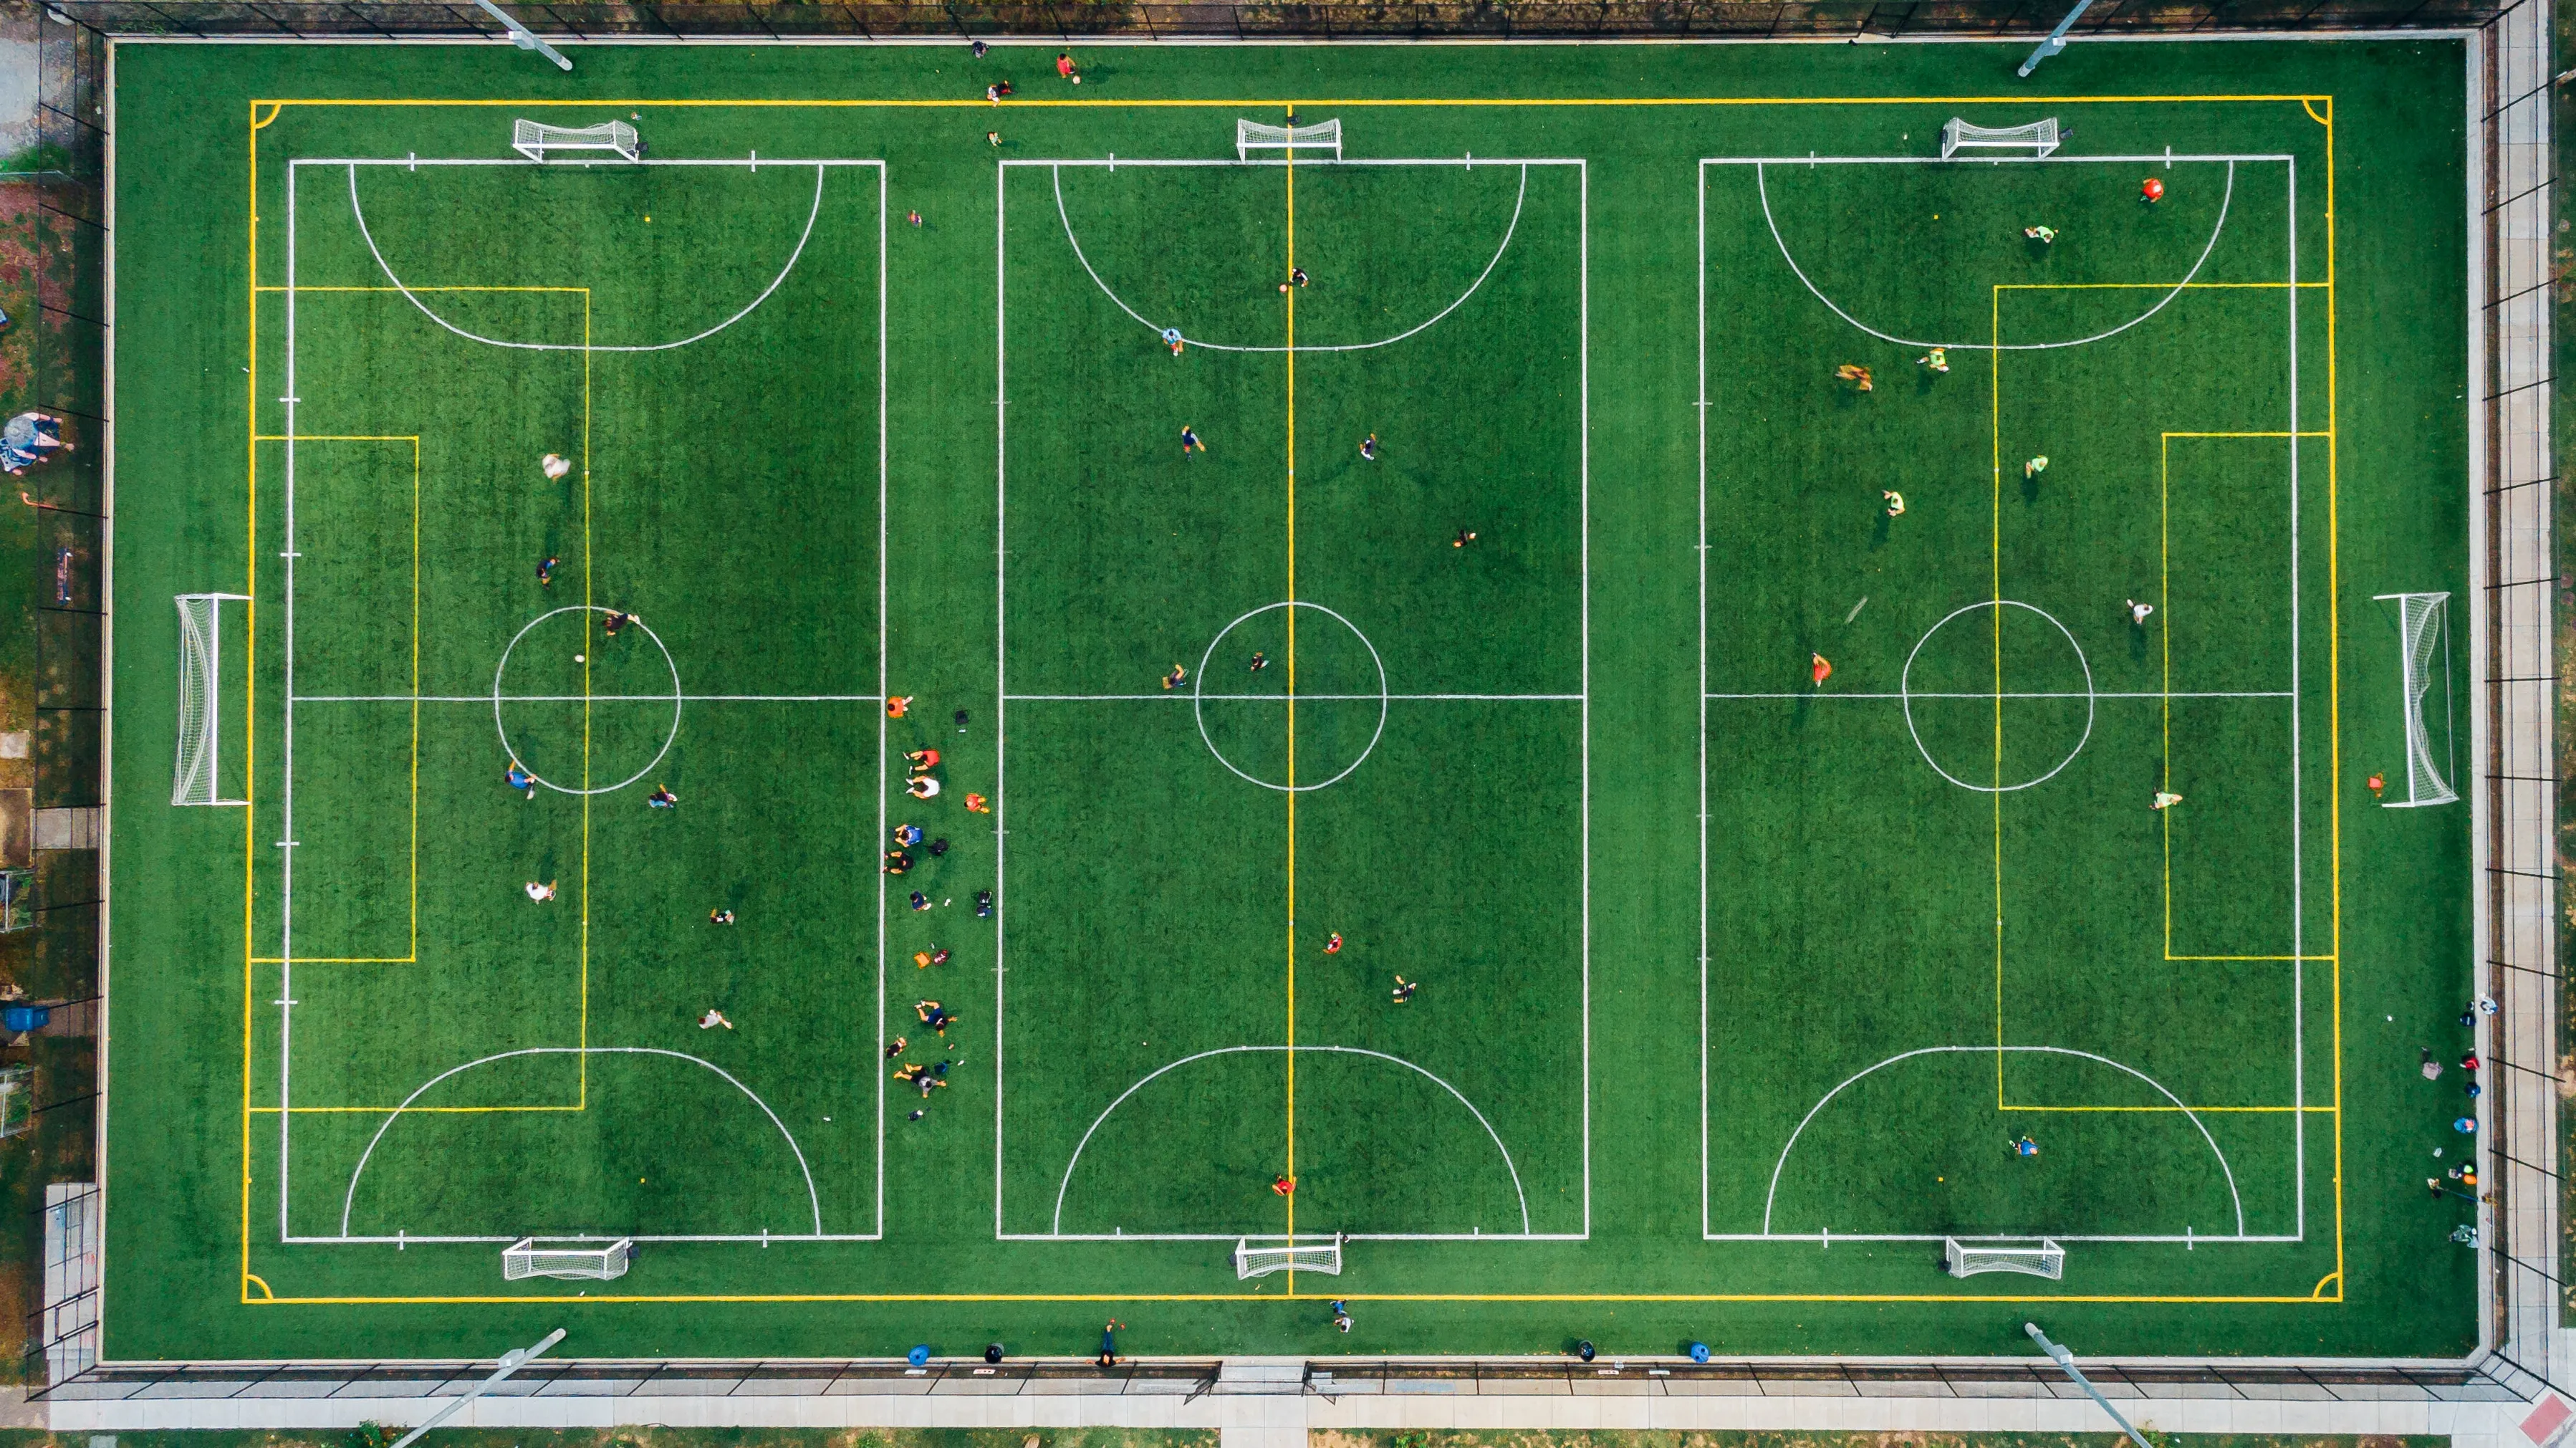 Sports Pitch Dimensions